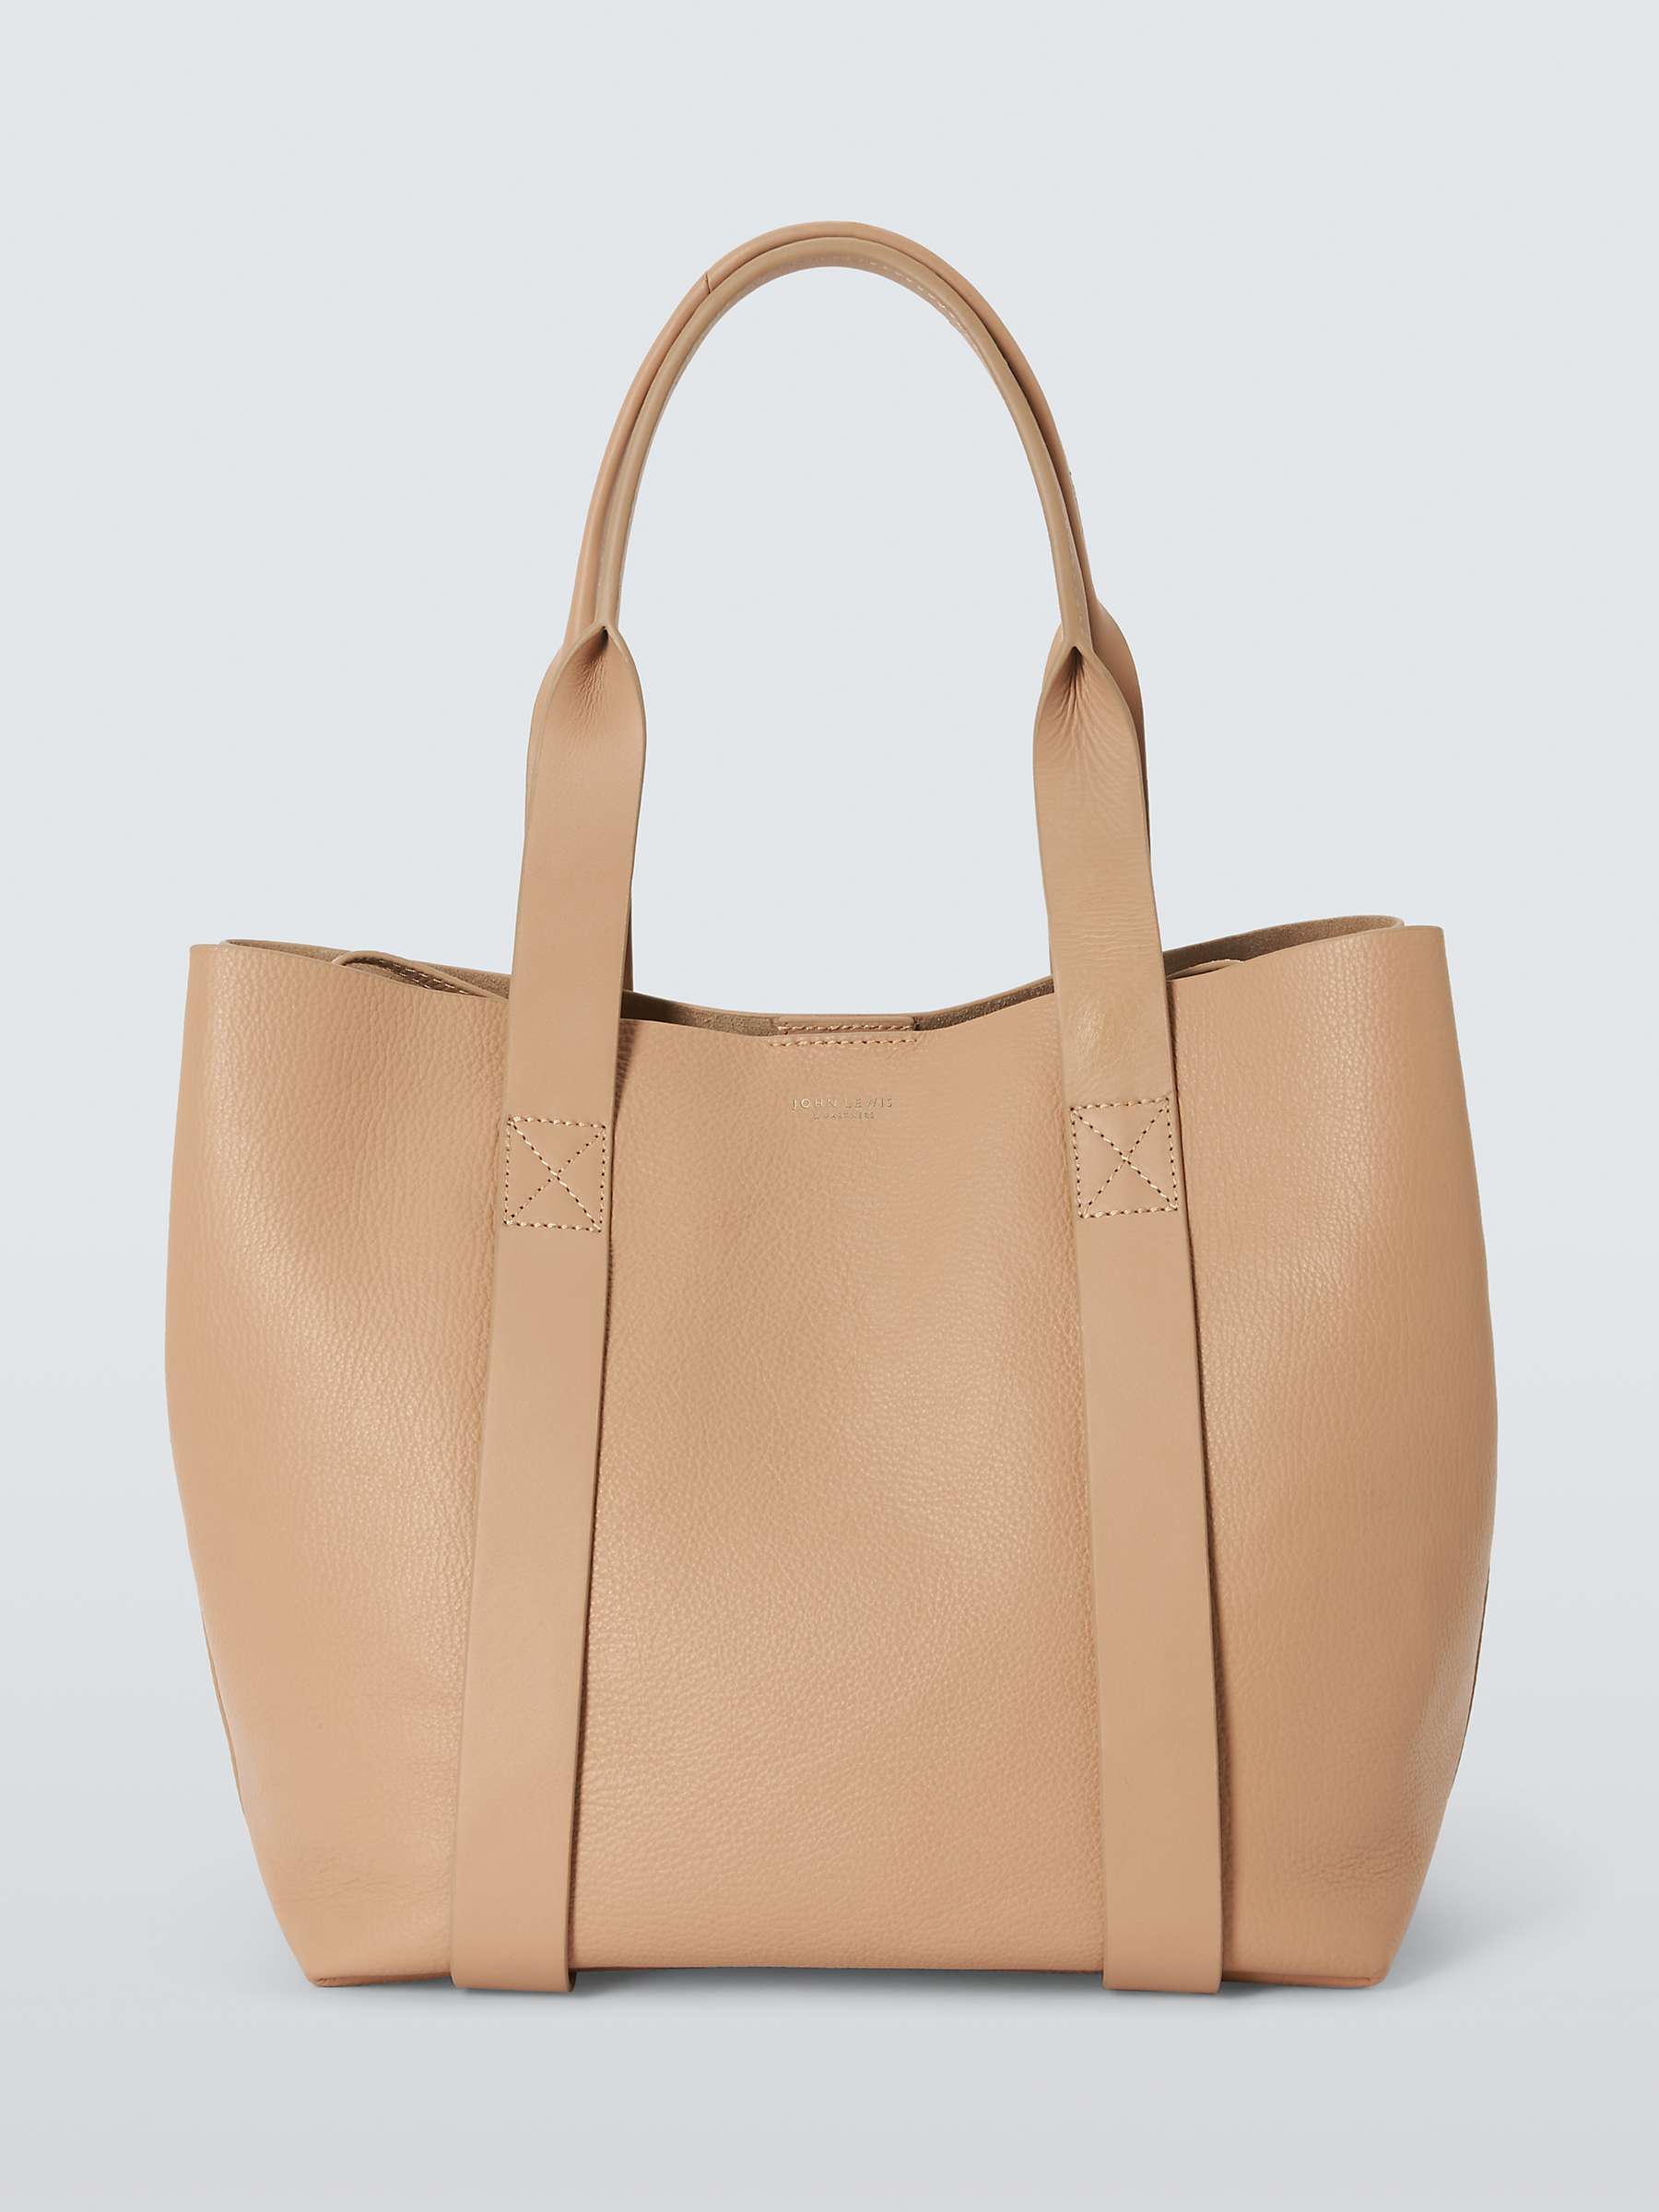 Buy John Lewis Luxe Leather Tote Bag Online at johnlewis.com